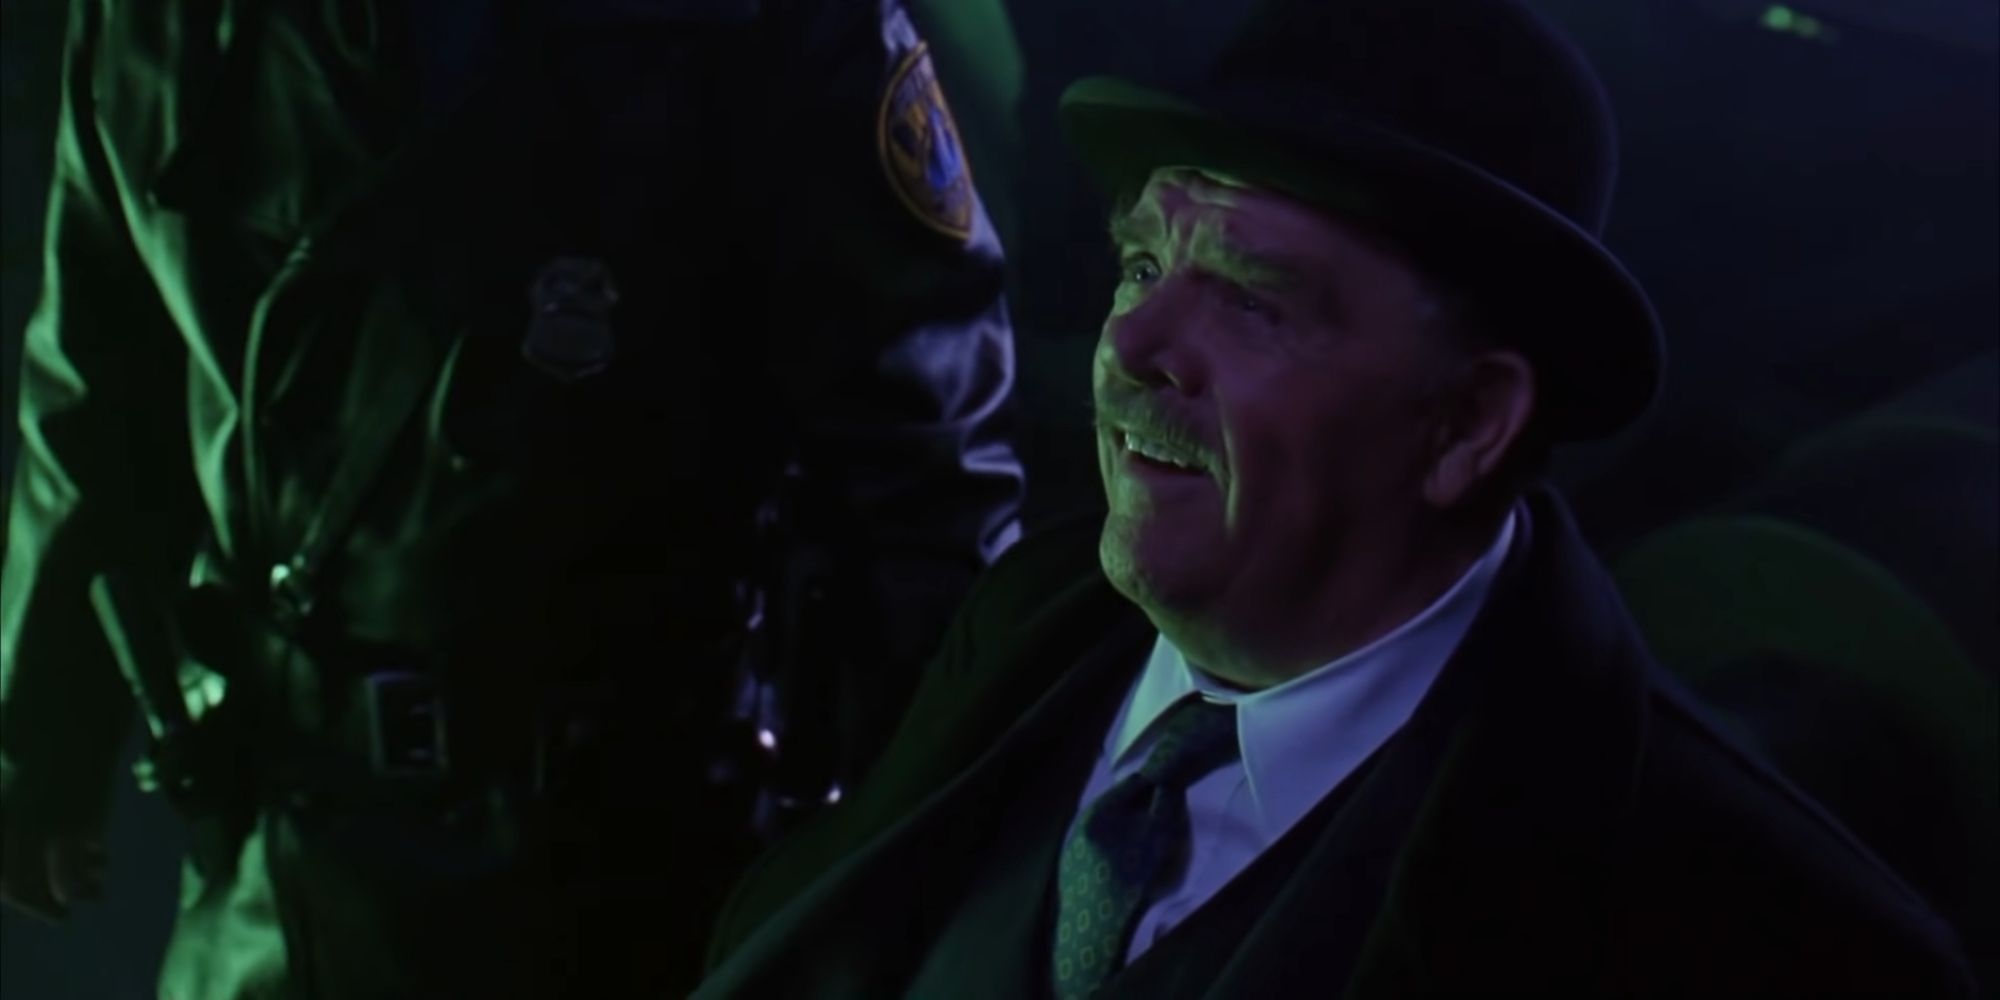 Pat Hingle as Commissioner Jim Gordon smiling at the arrival of Batman in the Batwing in Batman Forever